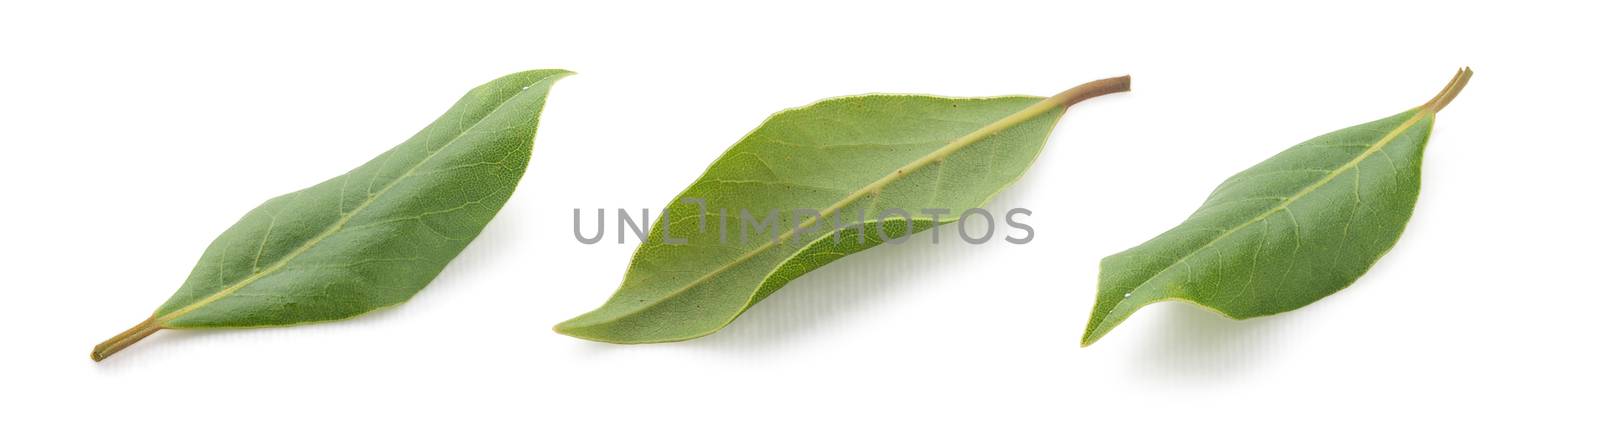 Some views of bay leaf on the white background